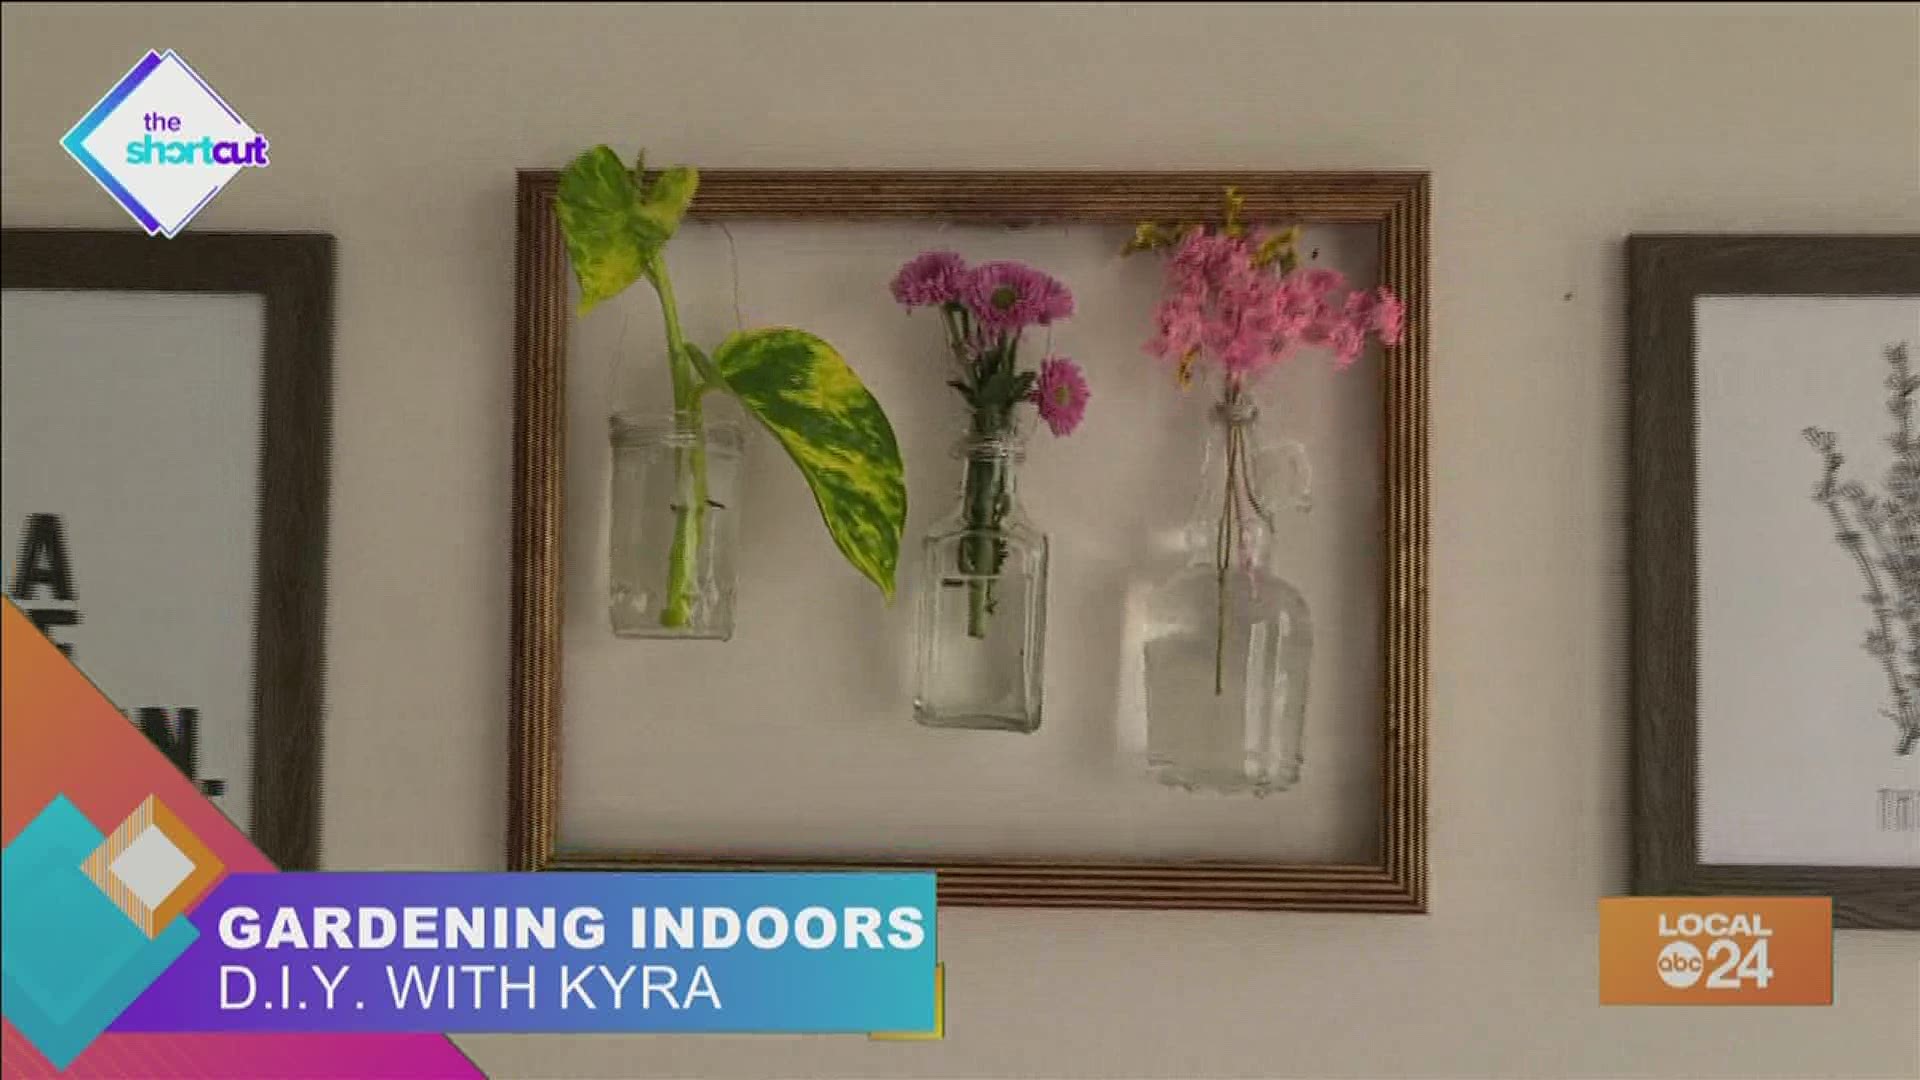 Not in the mood to garden, but still want to bring some plant life into your home? Join host Sydney Neely and DIY enthusiast Kyra Black as we take a look how!